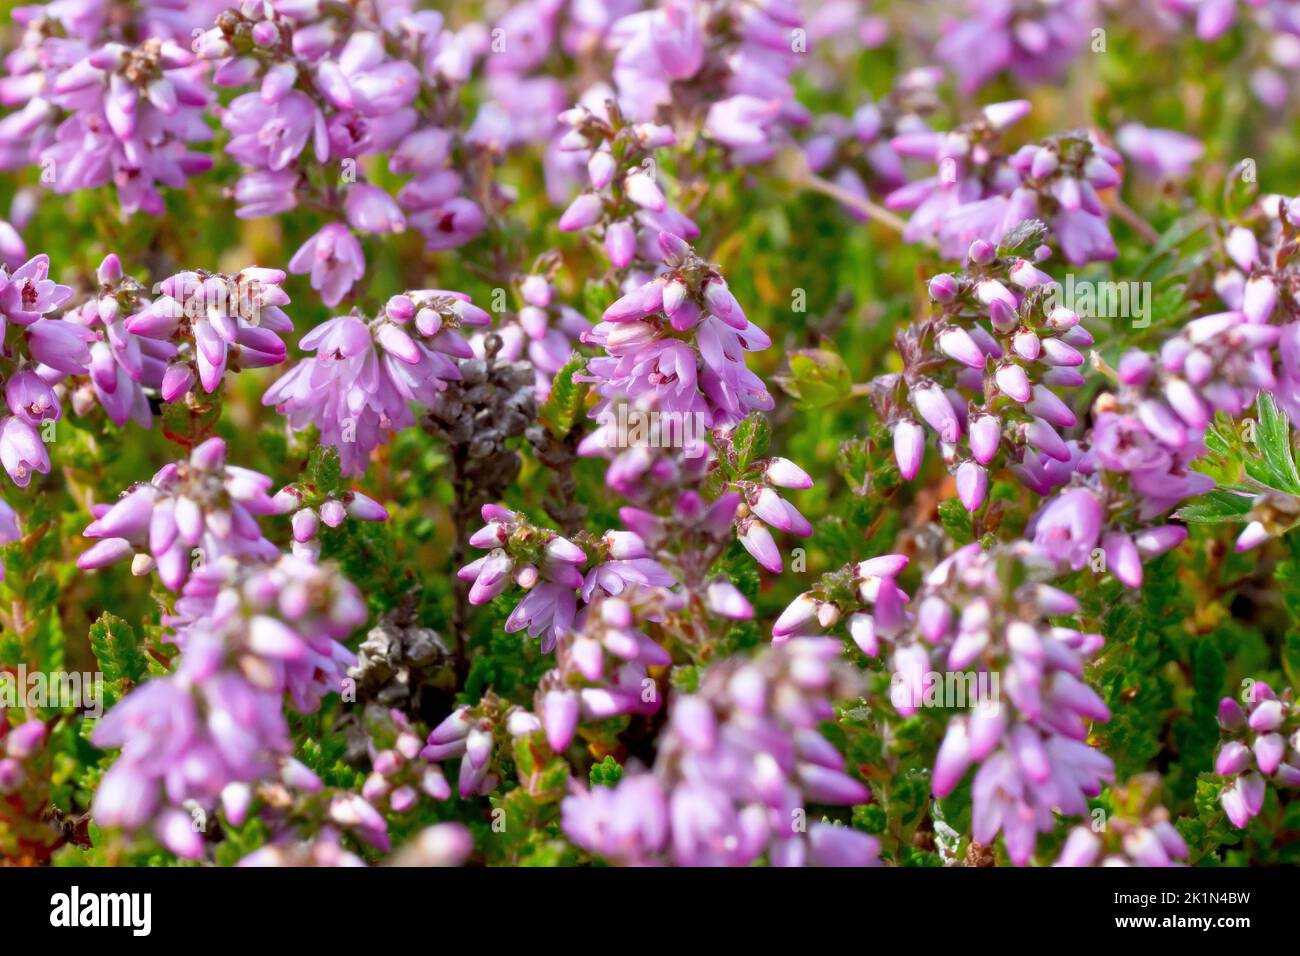 Heather or Ling (calluna vulgaris), close up showing in detail the tiny pink flowers of the common heath and moorland shrub. Stock Photo